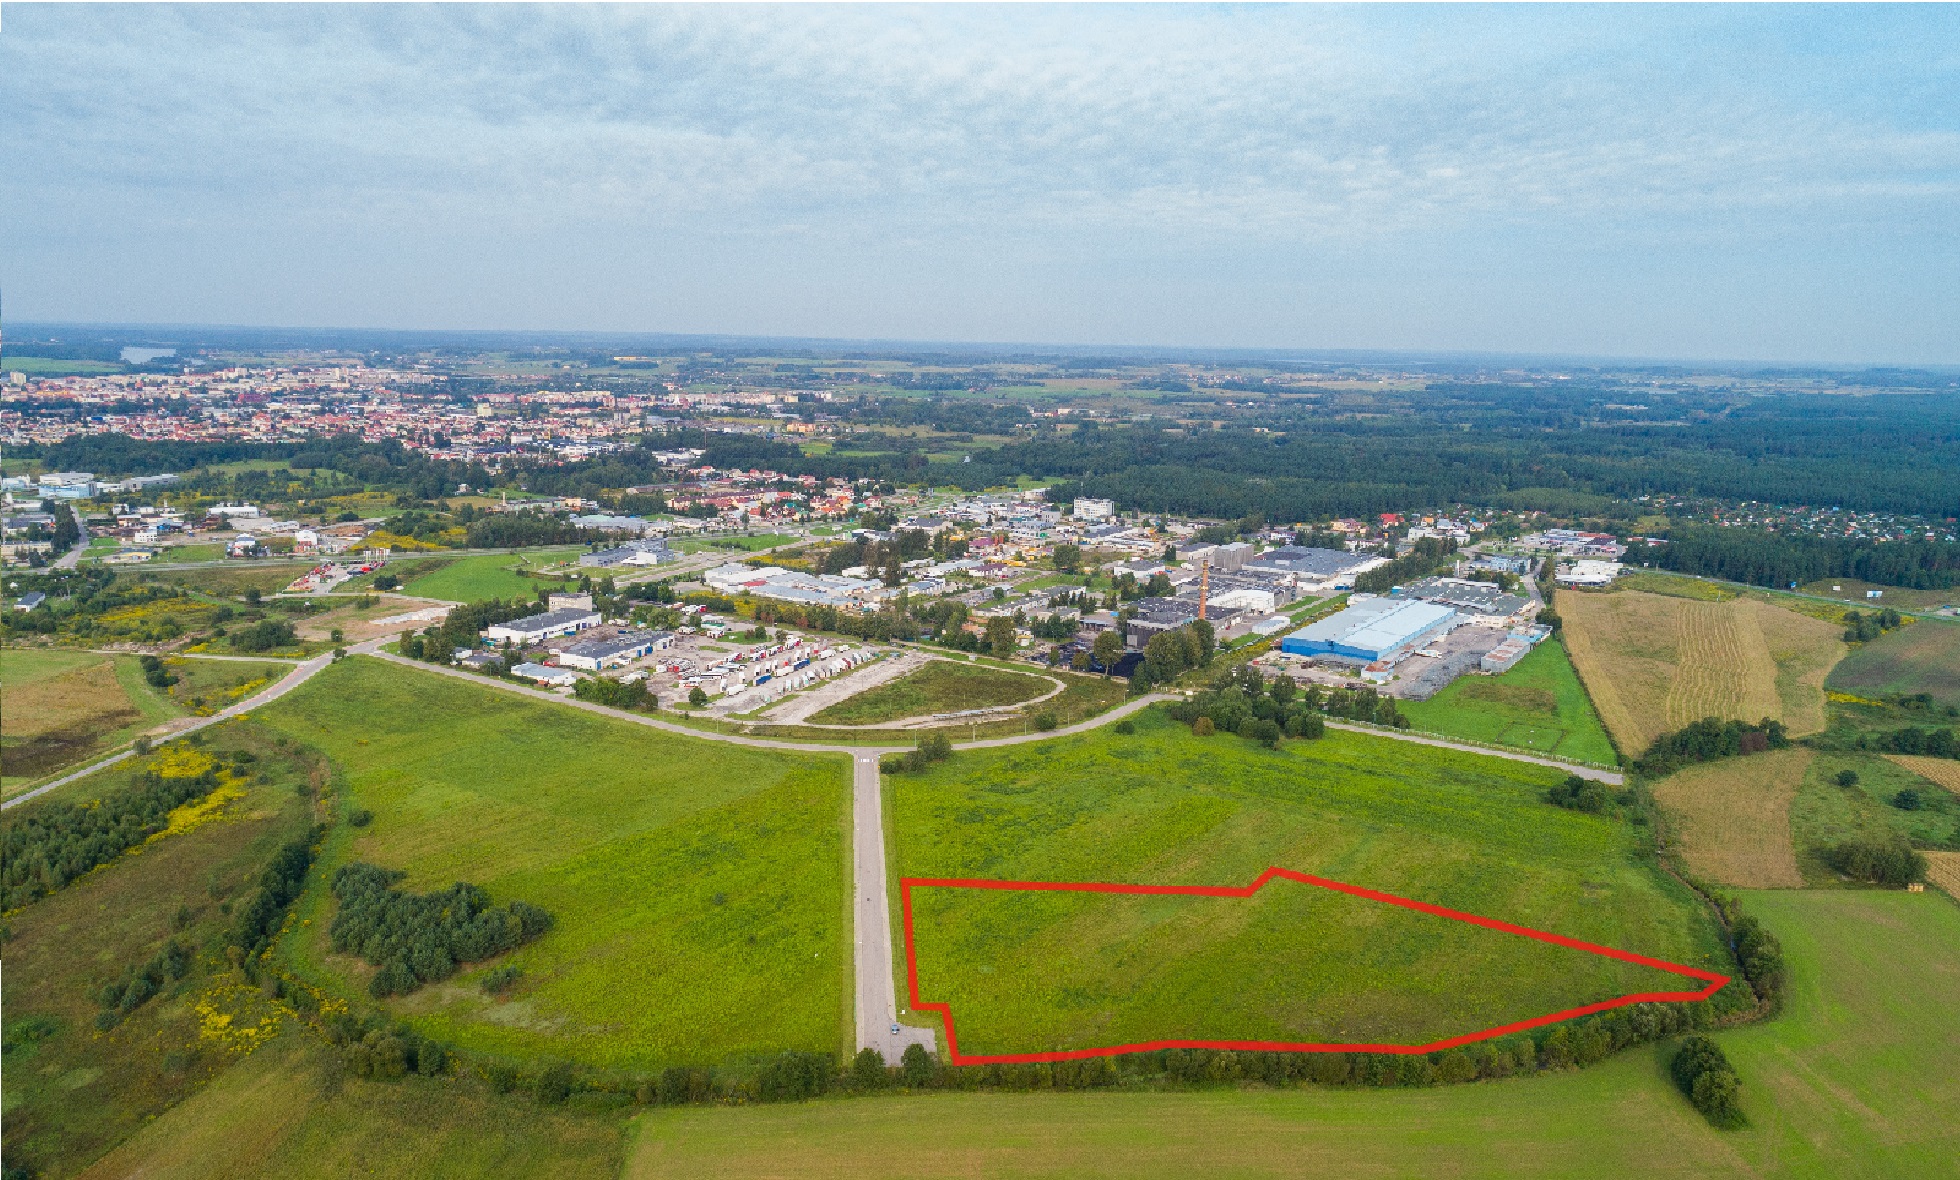 List of undeveloped land properties located in Elk on Production Street, covered by the area of the Suwalska Special Economic Zone of the Elk Subzone, intended for sale by an open-border written invitation to tender